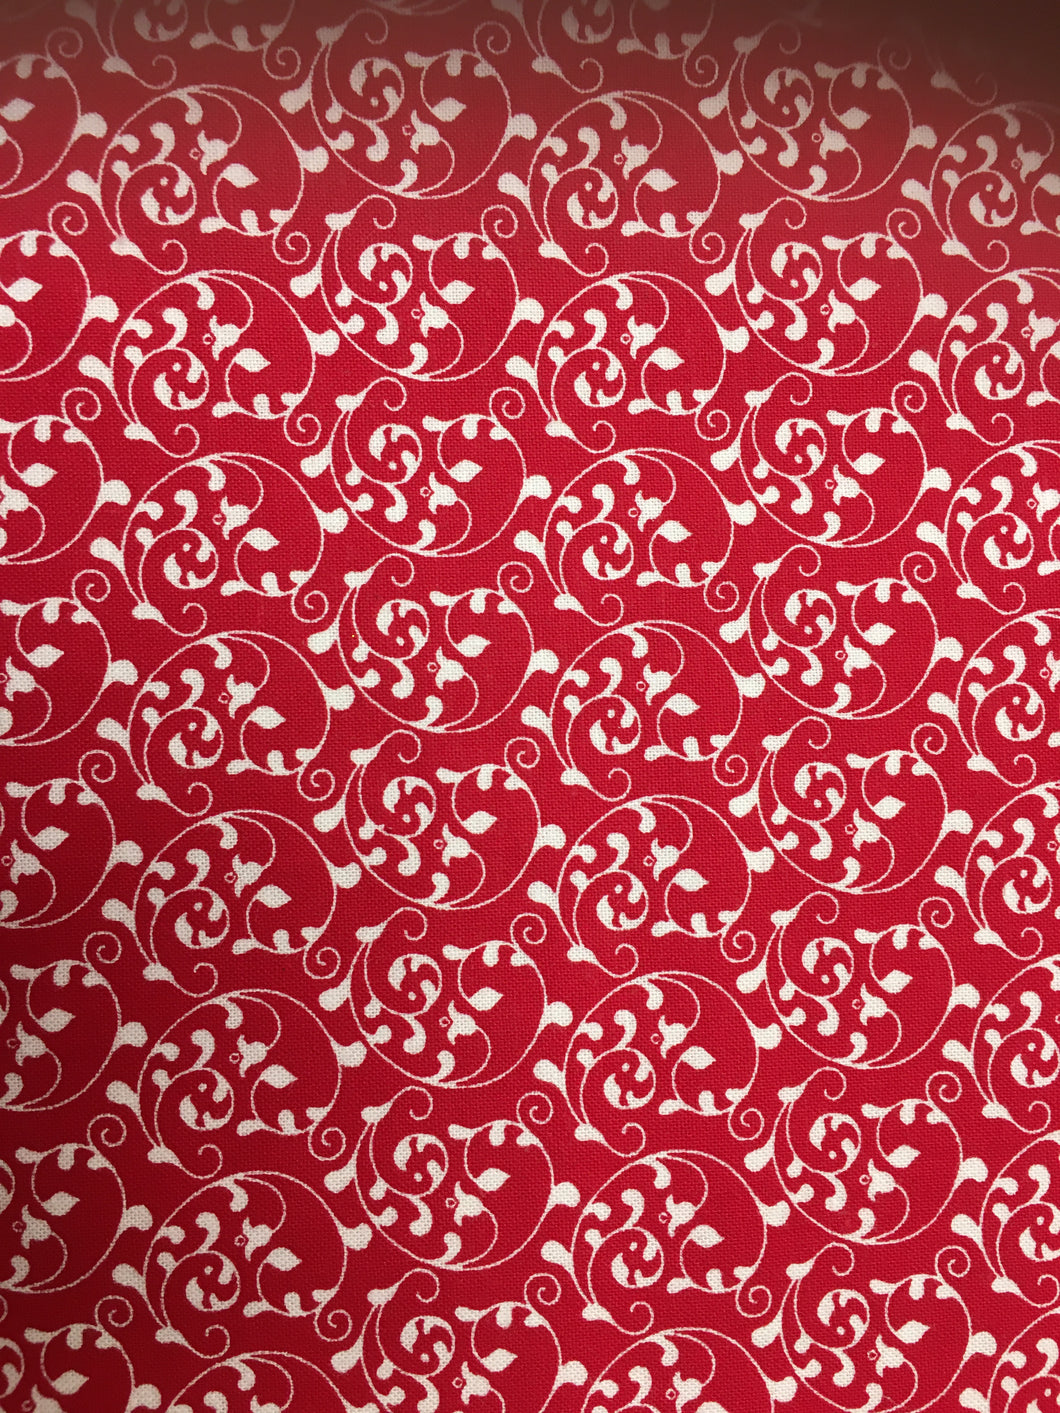 Sew Simple Red/White